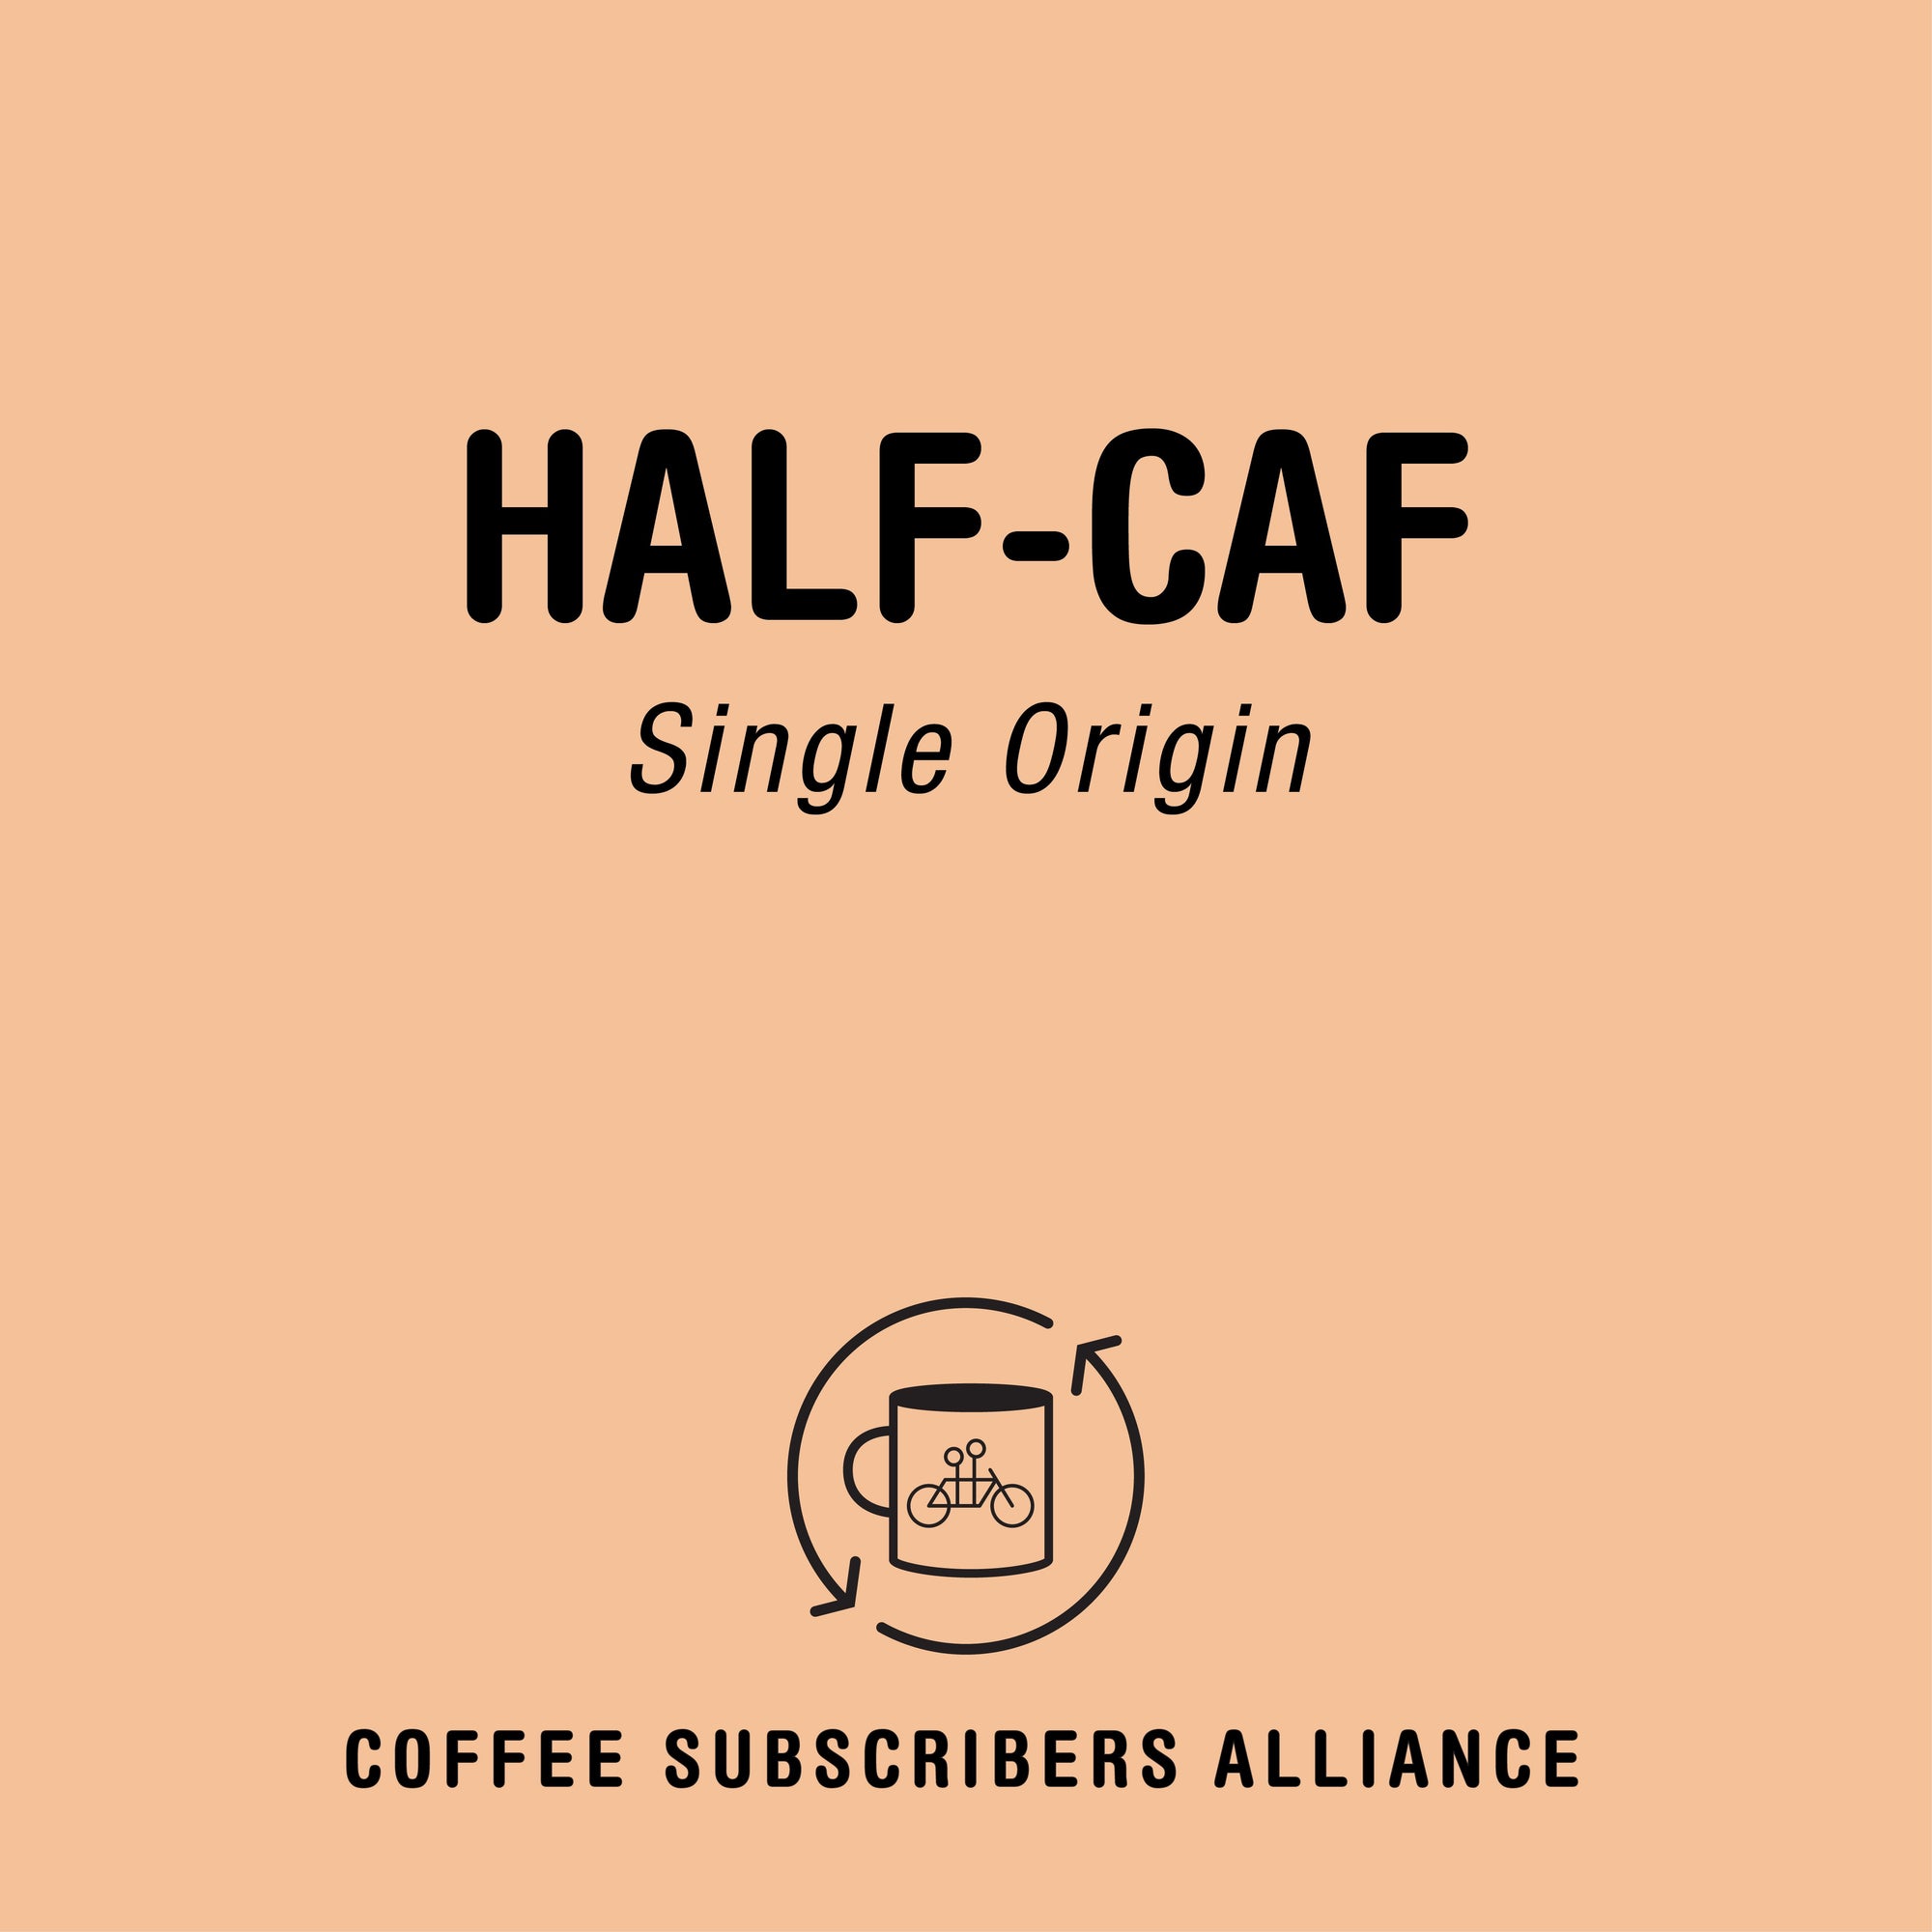 Minimalist poster with text "Half-Caf Subscription Gift 2 Weeks x 6" at the top, a circular logo with a coffee cup and two leaves in the center, and text "coffee subscription alliance" underneath, on Tandem.